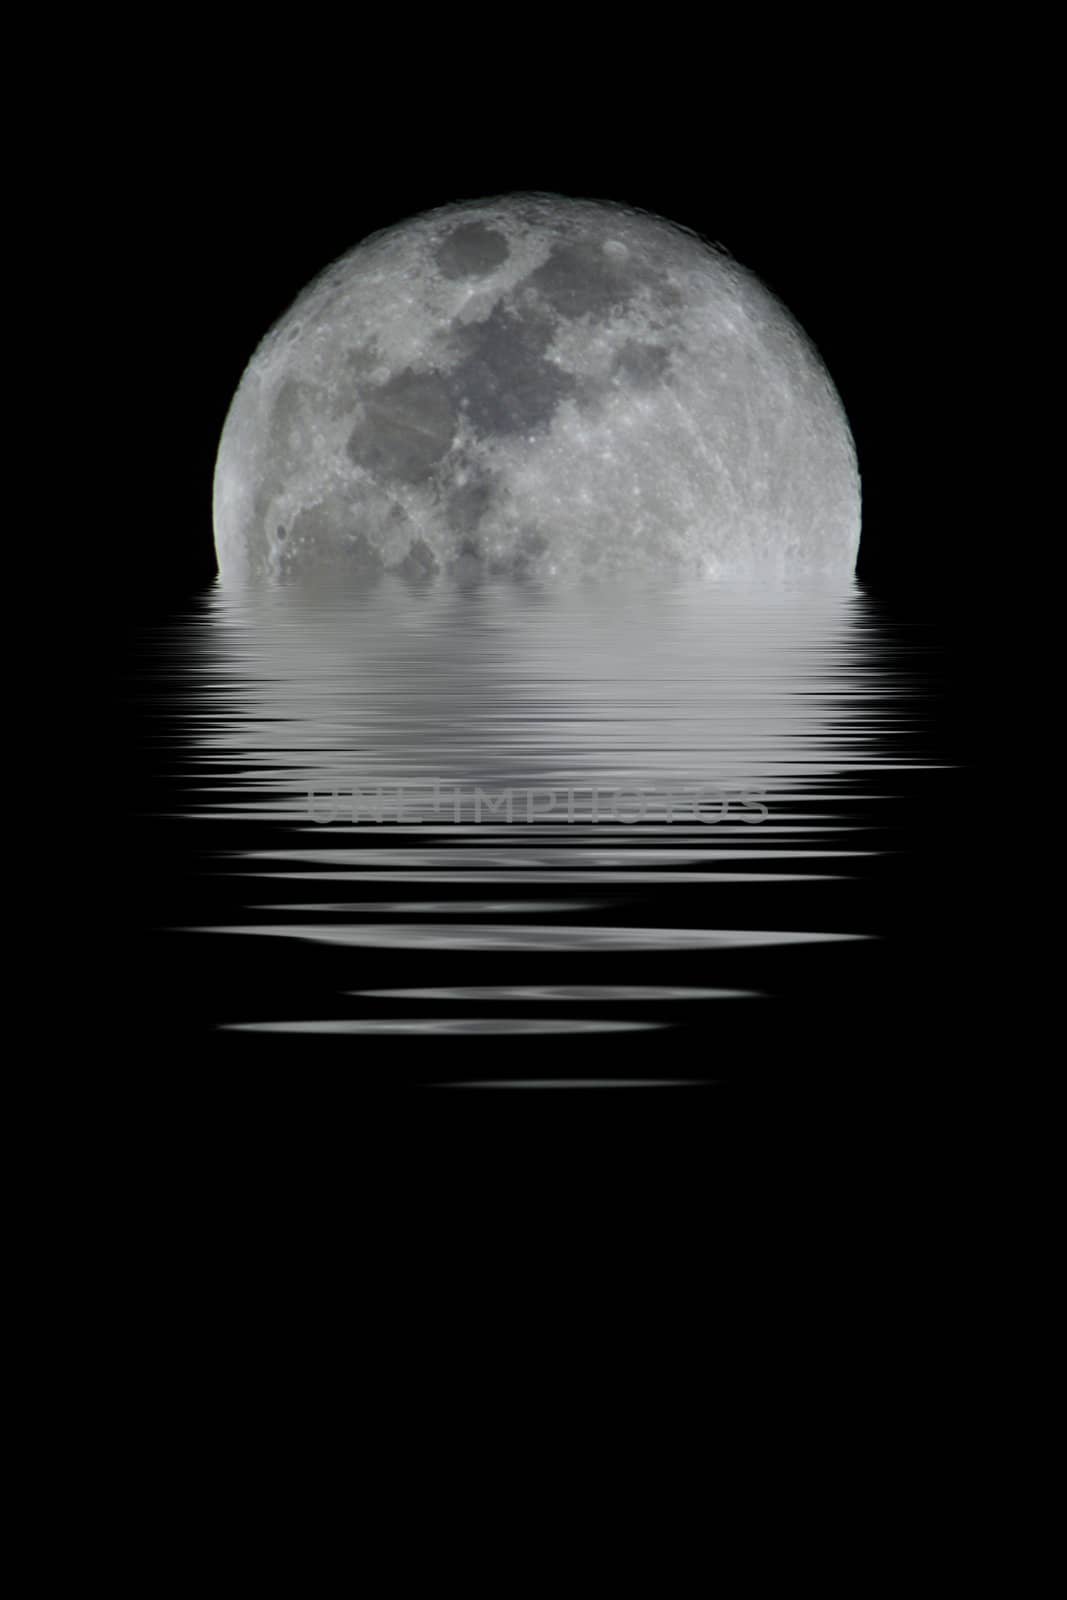 A detailed full moon. You can see all craters and details.

(with water reflection)